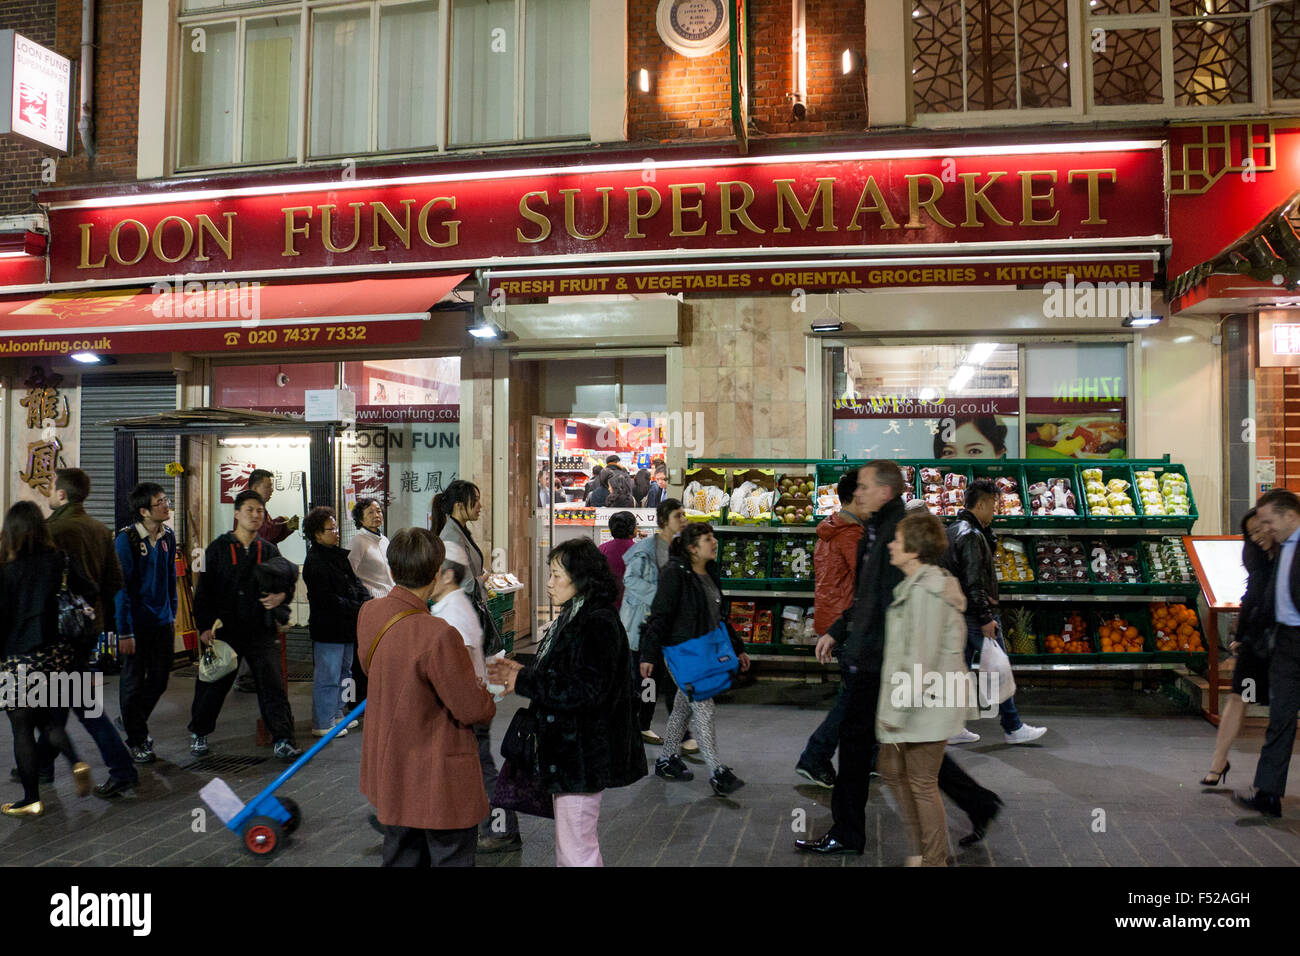 Busy street scene outside Loon Fung supermarket on Gerrard Street in Chinatown West End London England UK Stock Photo